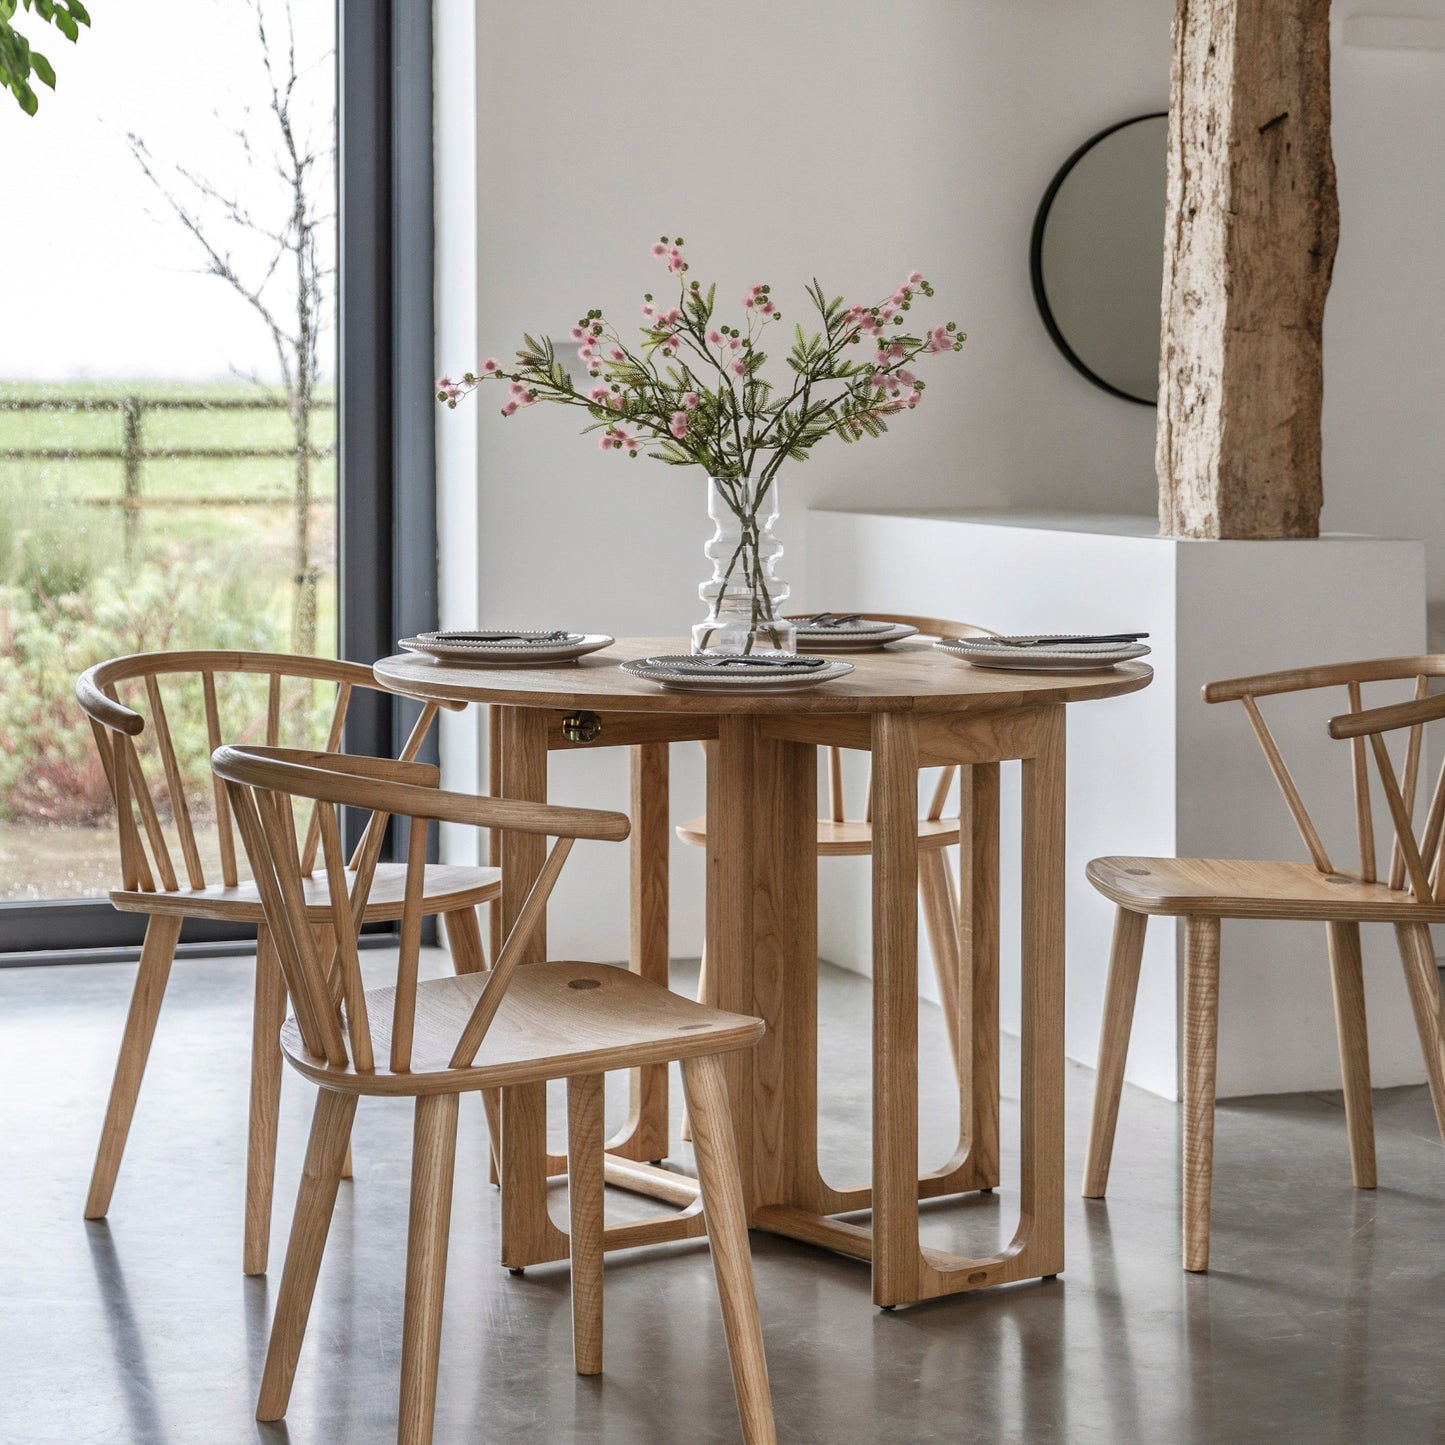 Craft Folding Dining Table - Colour Options